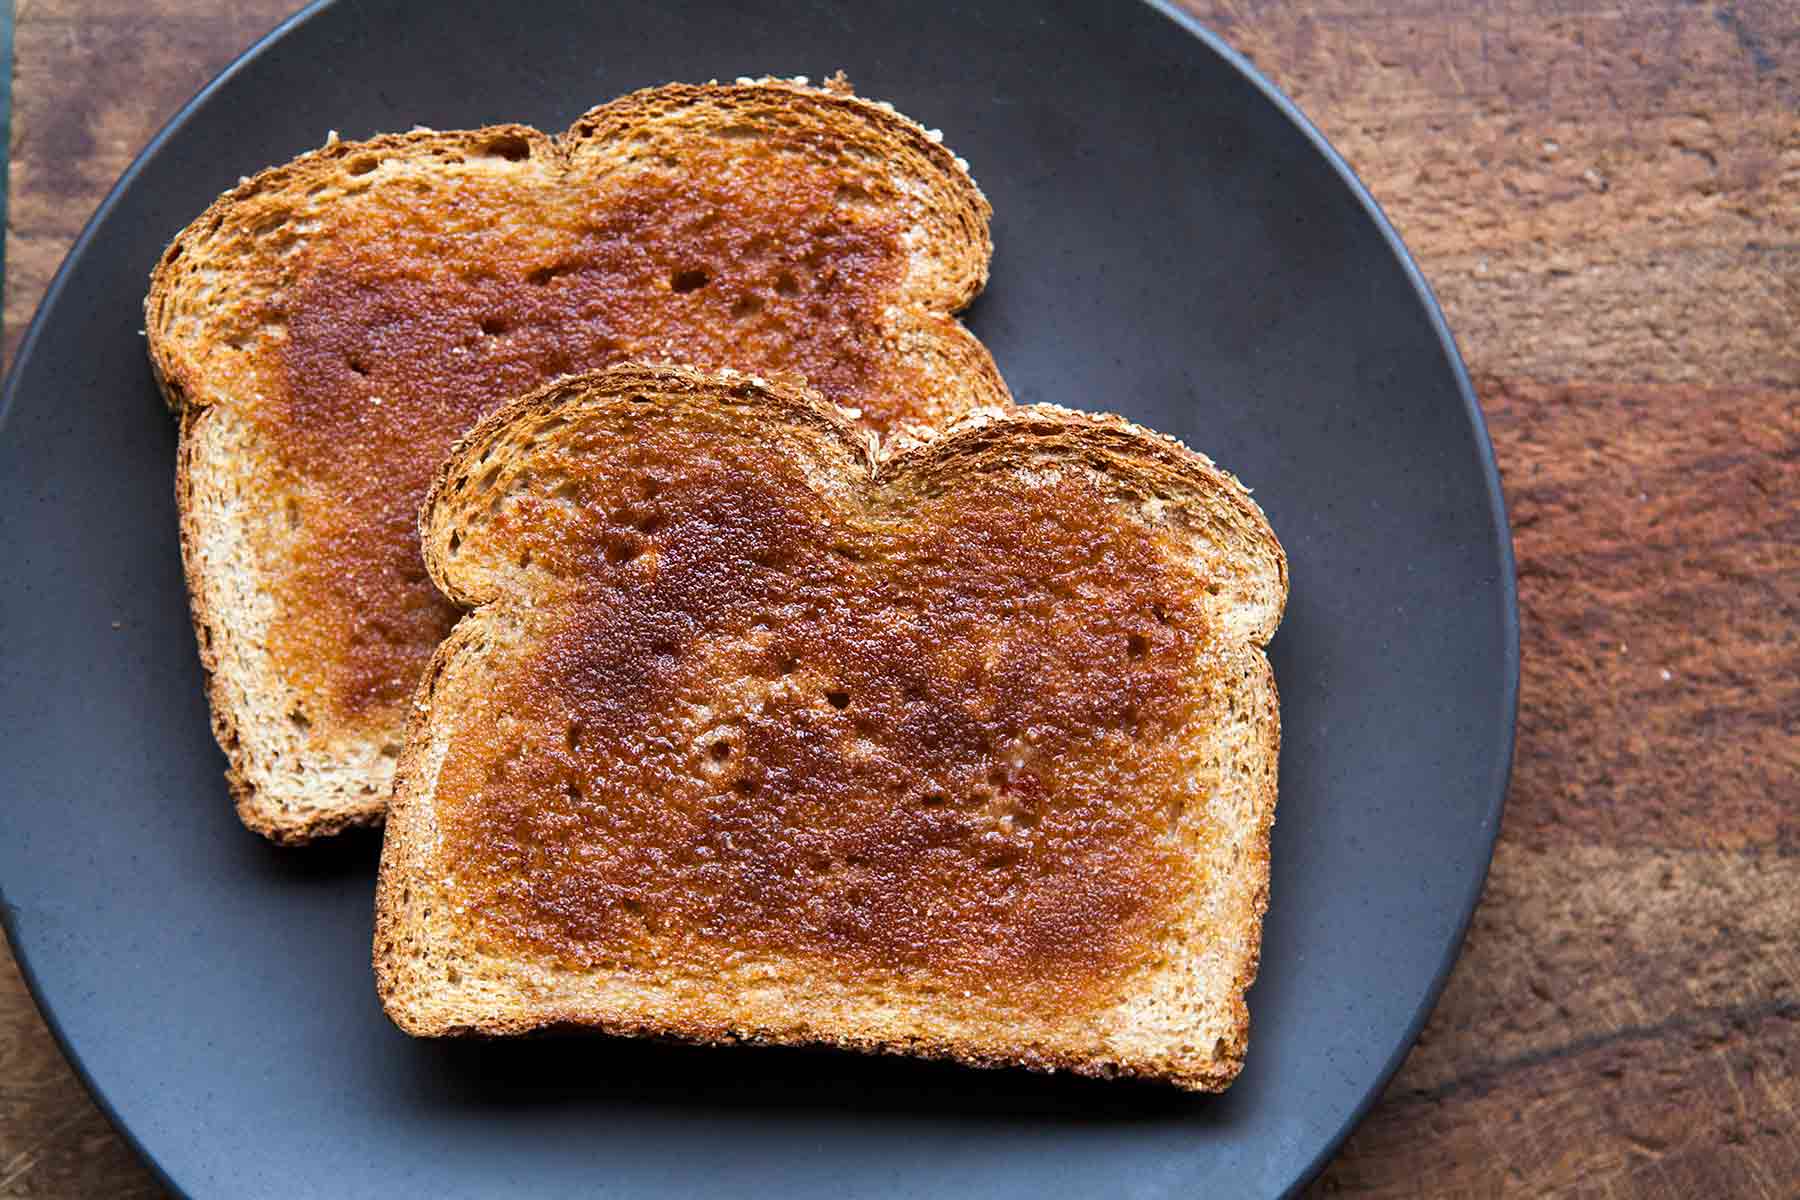 Toast Wallpaper High Quality